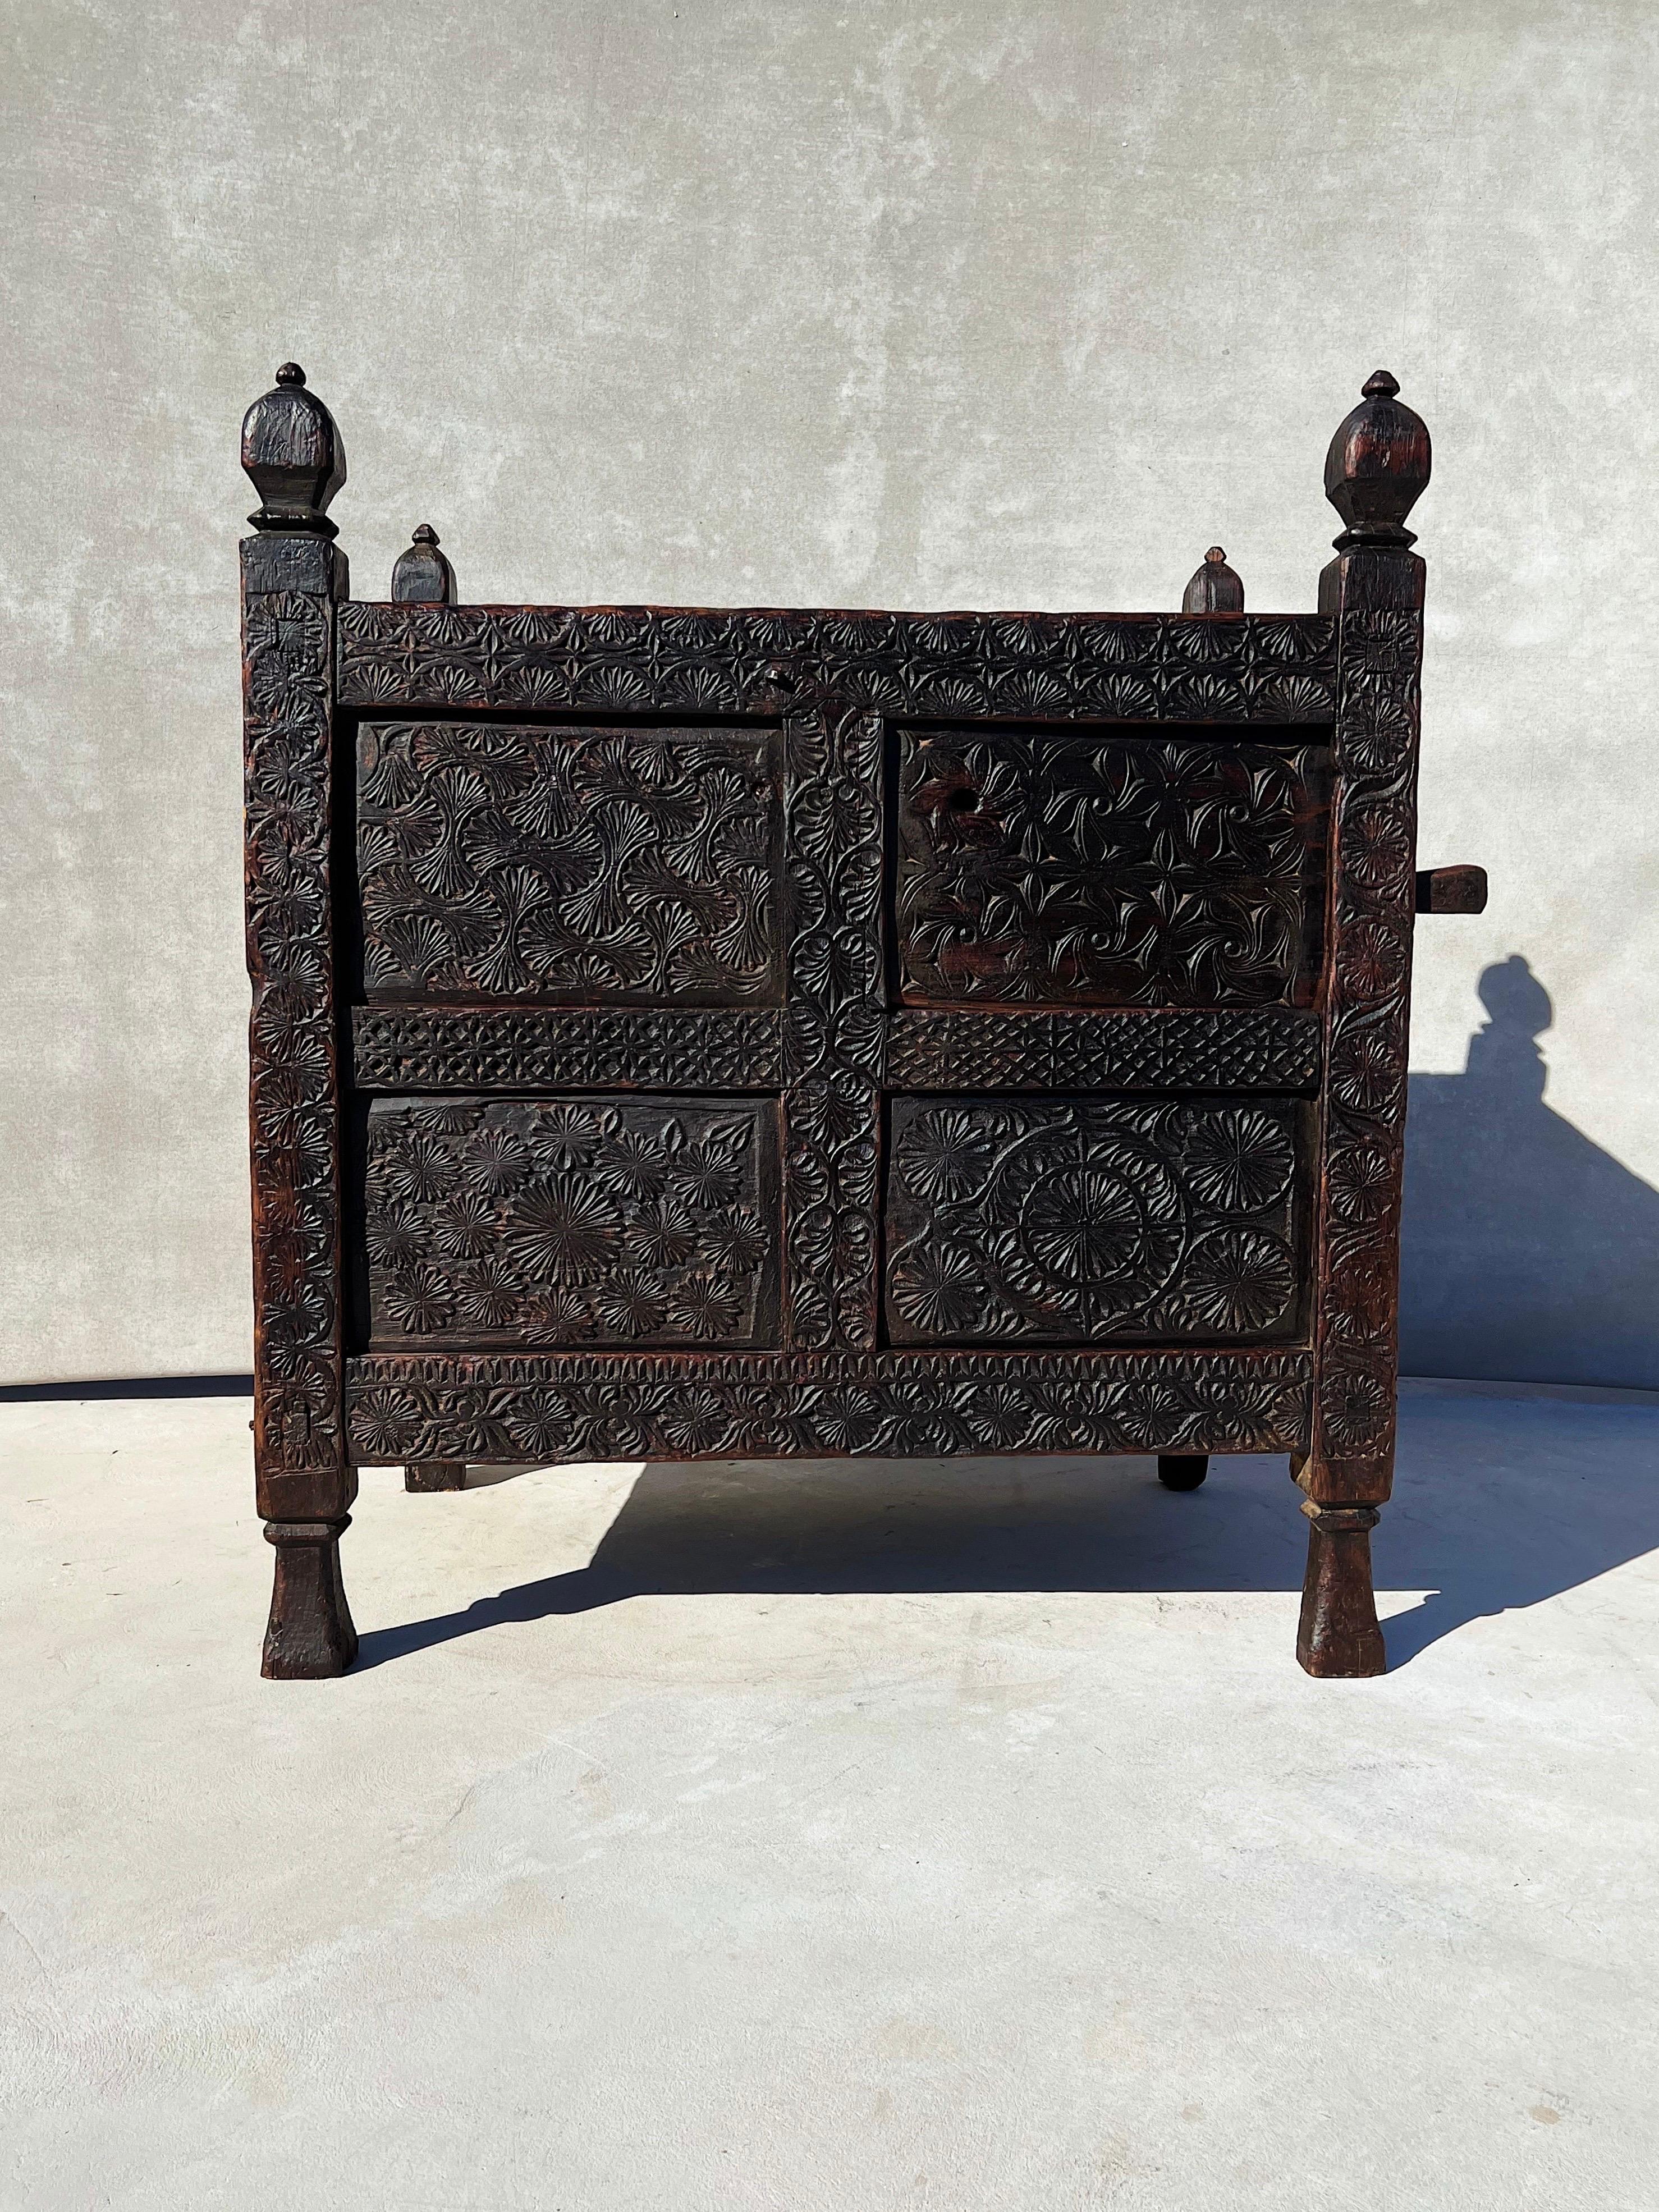 Early 19th Century Antique Damachiya Dowry Chest

A rare and one of a kind antique, dated from the early 19th century.
A spectacle of excellent and old craftsmanship. 
Artisan made, handcrafted. 
Perfectly wabi-sabi. 

Intricately hand-carved and